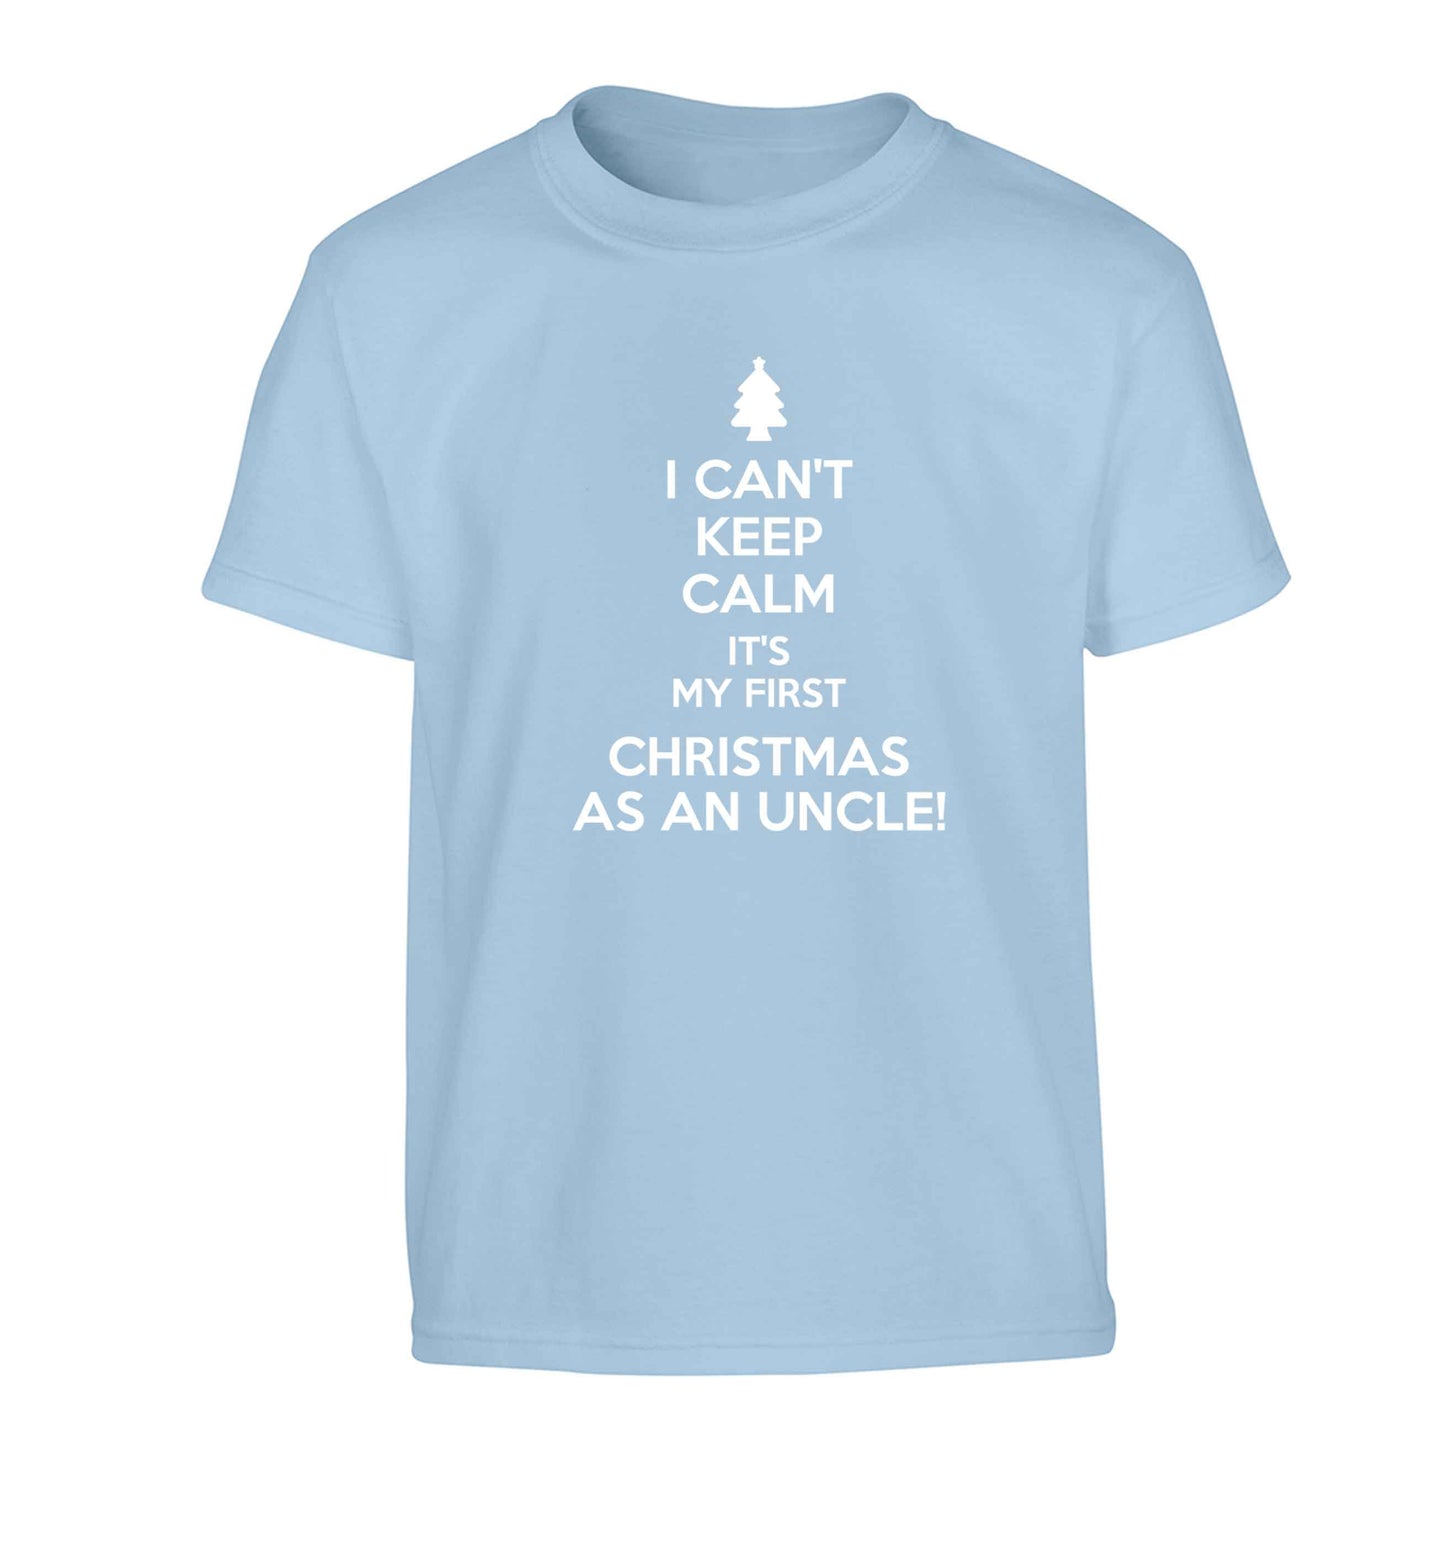 I can't keep calm it's my first Christmas as an uncle! Children's light blue Tshirt 12-13 Years